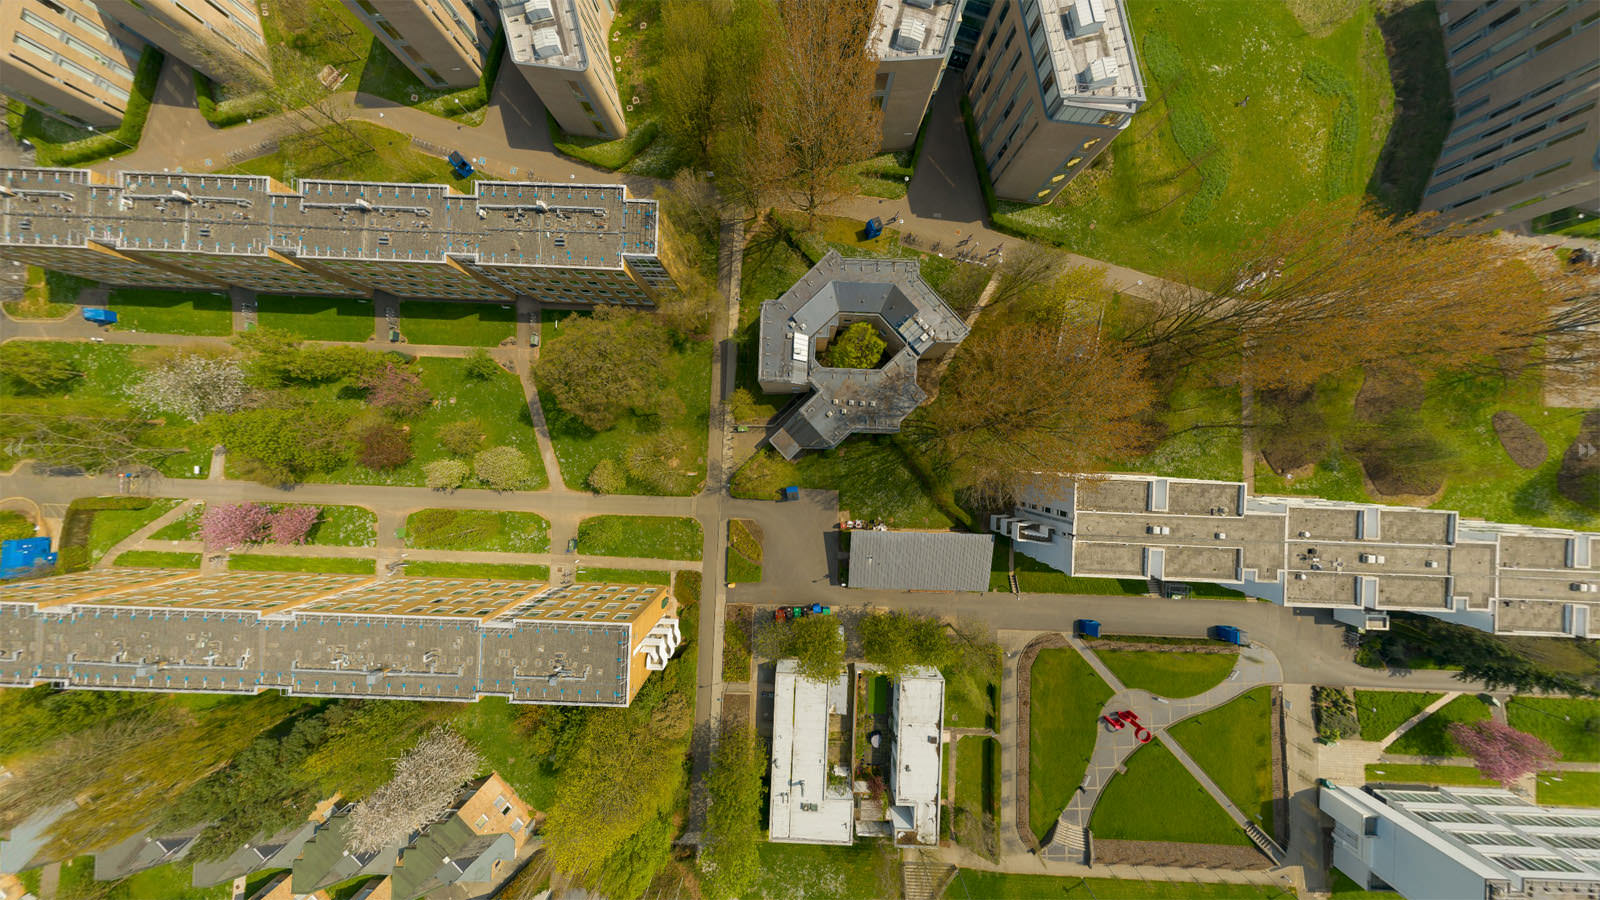 Still taken from the aerial virtual Tour at the University of Warwick